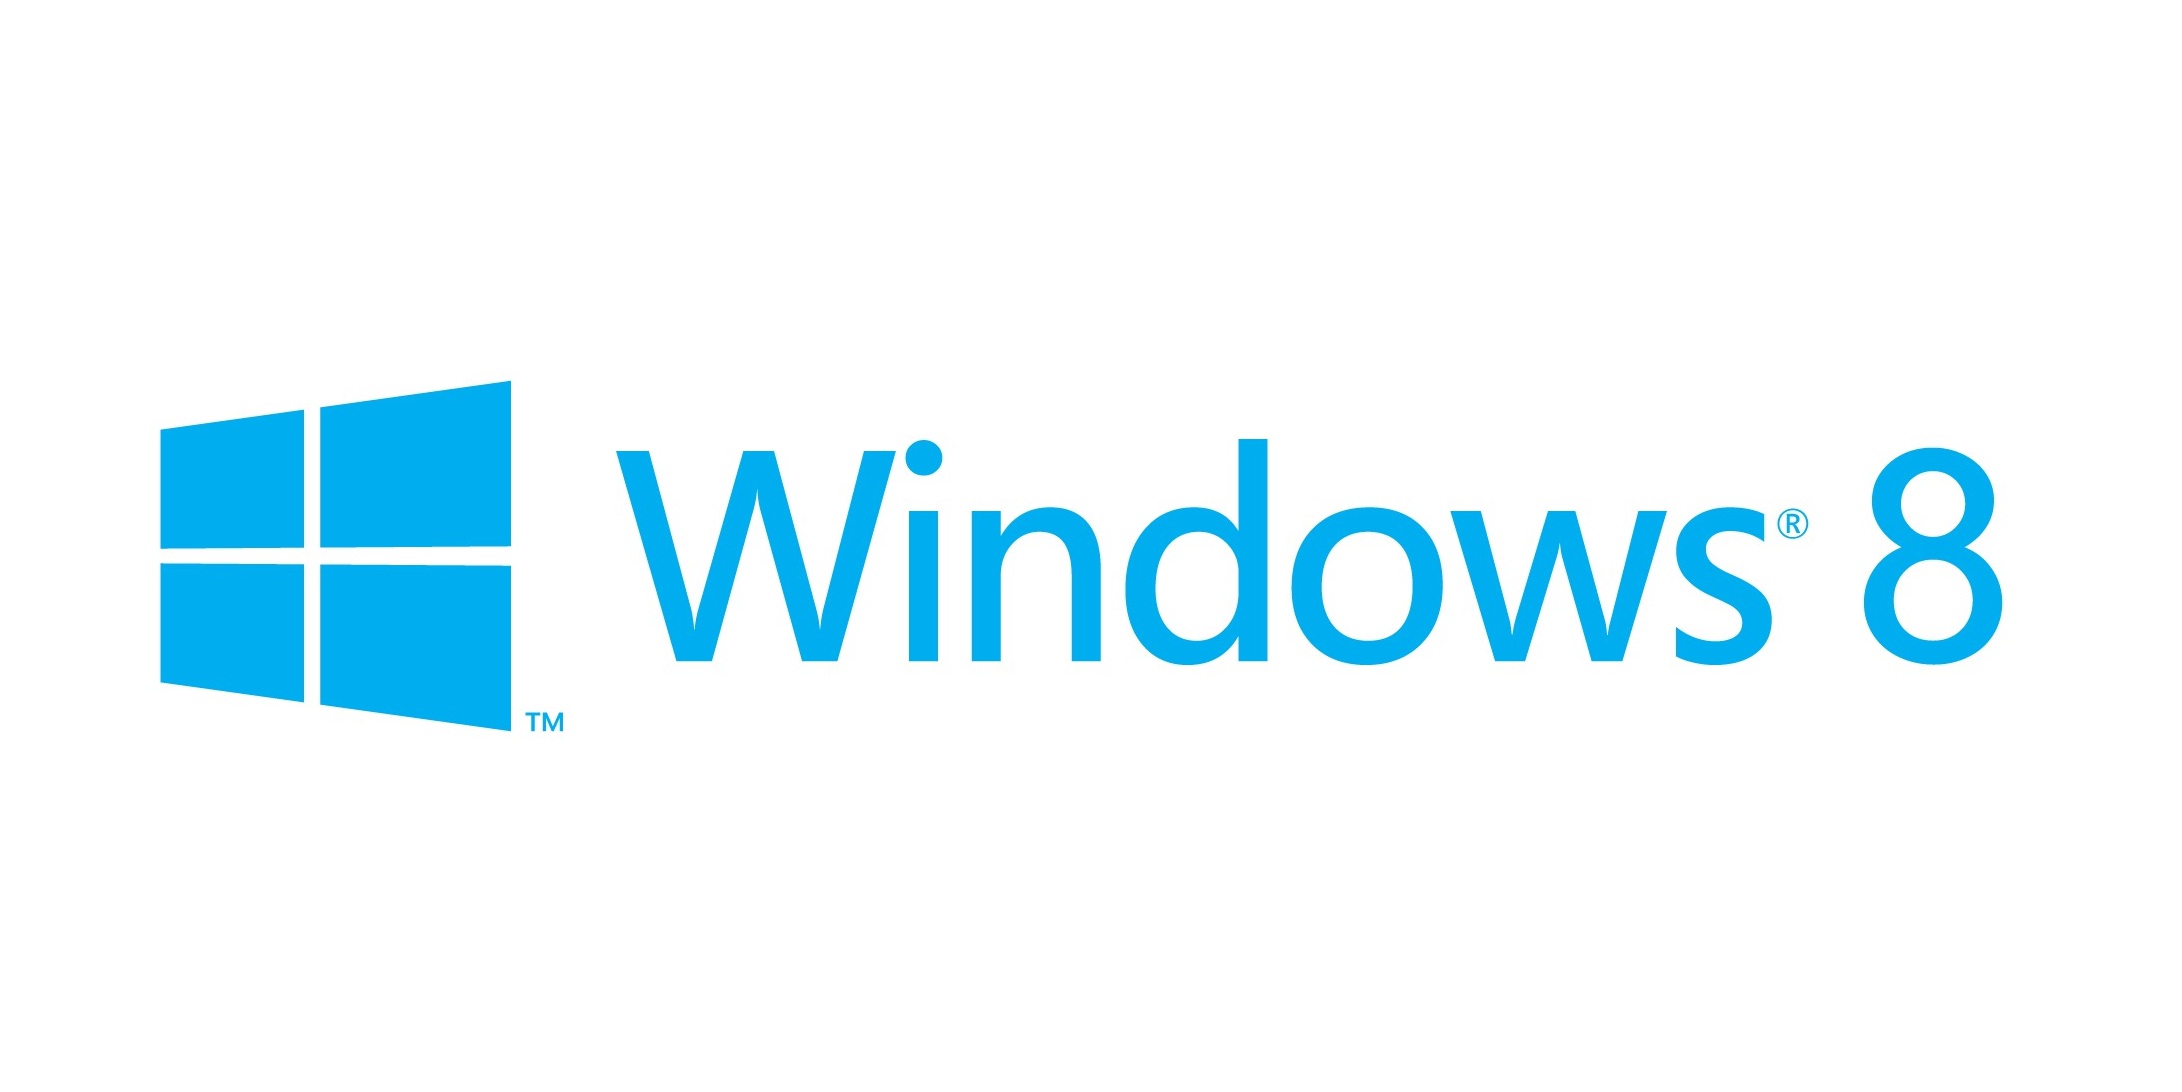 Windows 8 Confirmed for October, RTM Early August